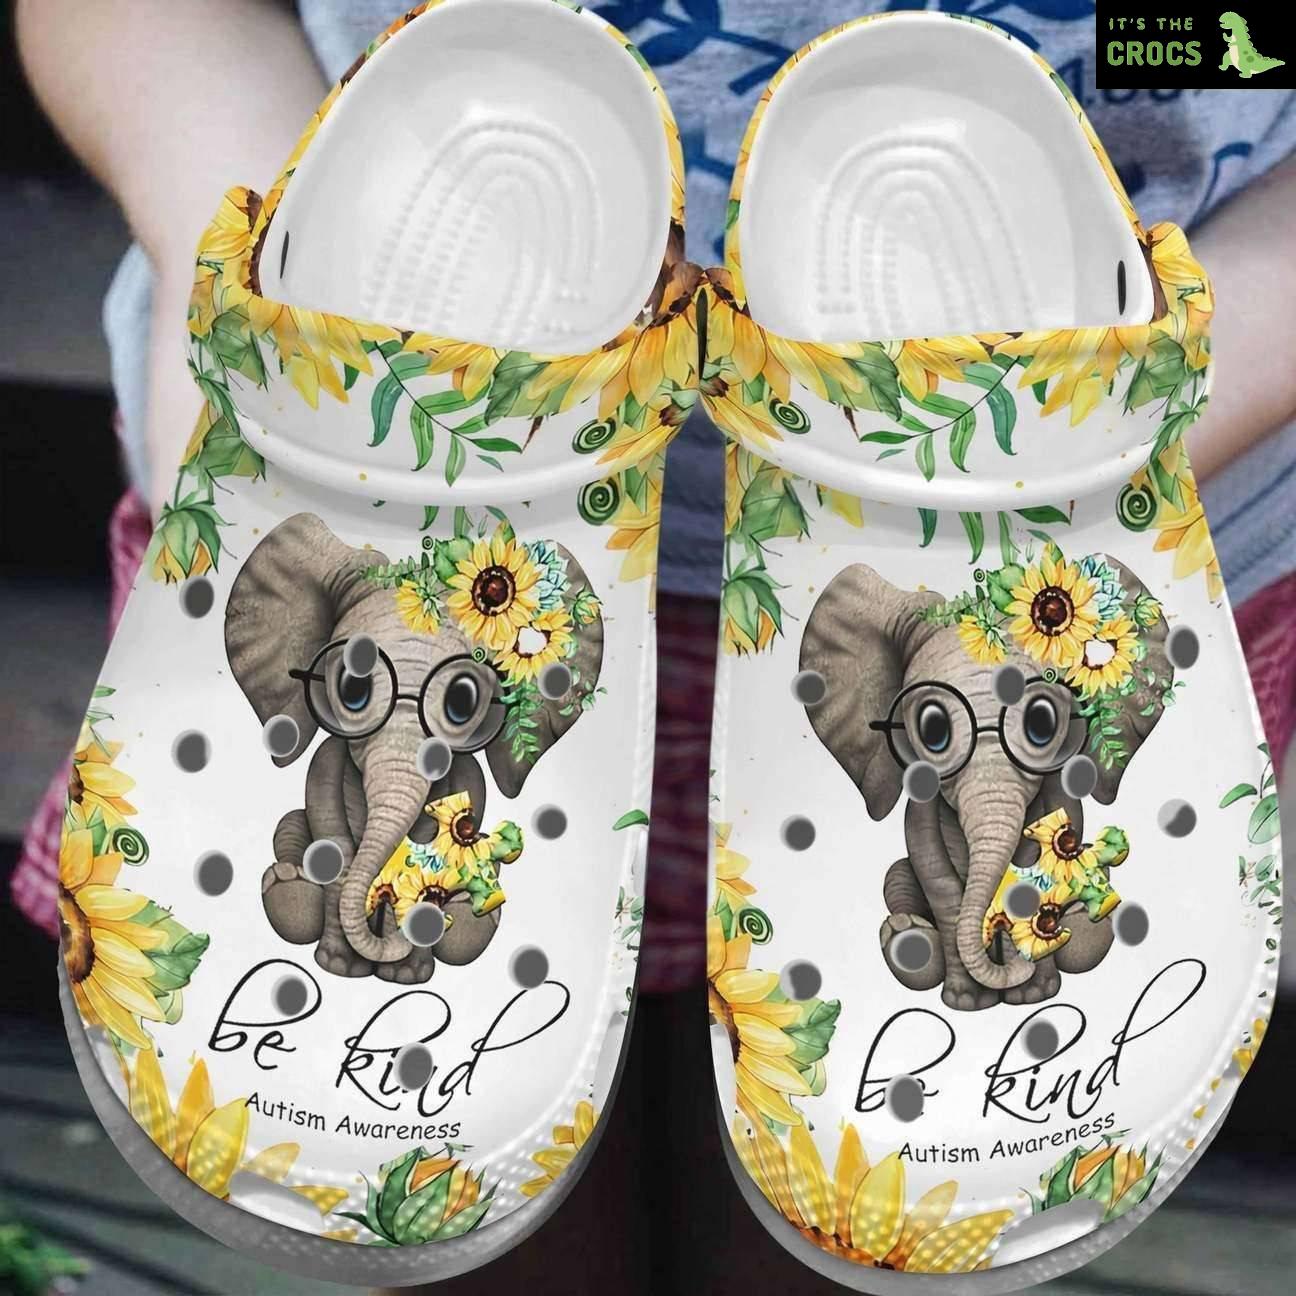 Autism Awareness Day Sunflower Baby Elephant Be Kind Puzzle Pieces Crocband Clog Crocs Shoes